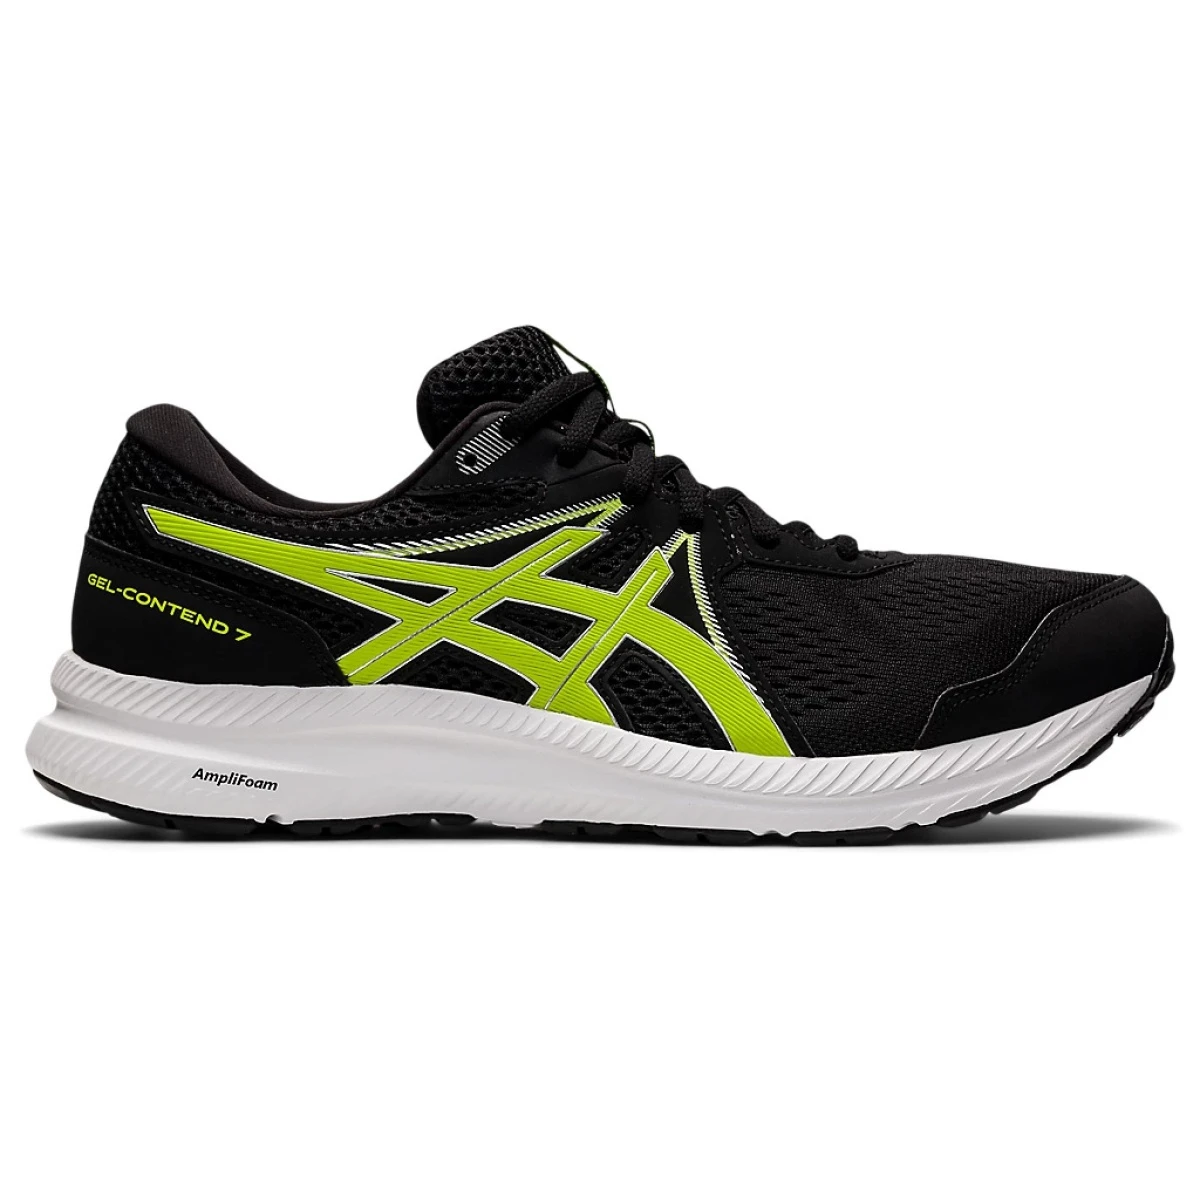 Buy Asics Gel 7 Mens Running Lowest Prices - Sportsuncle